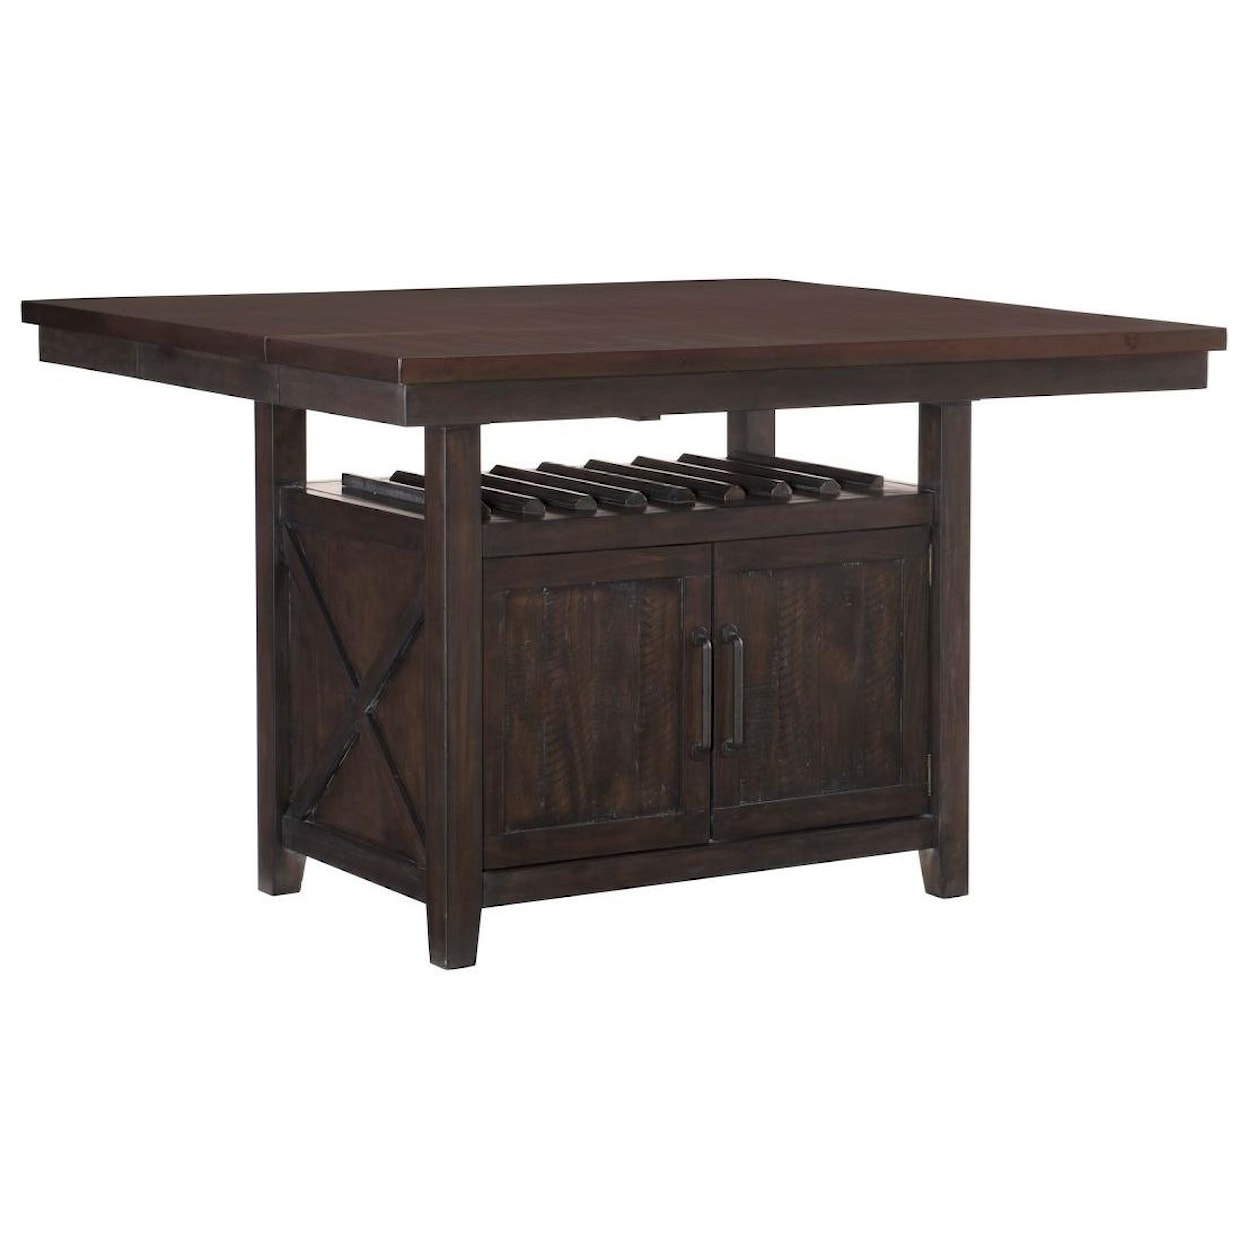 Homelegance Furniture Oxton Counter Height Table